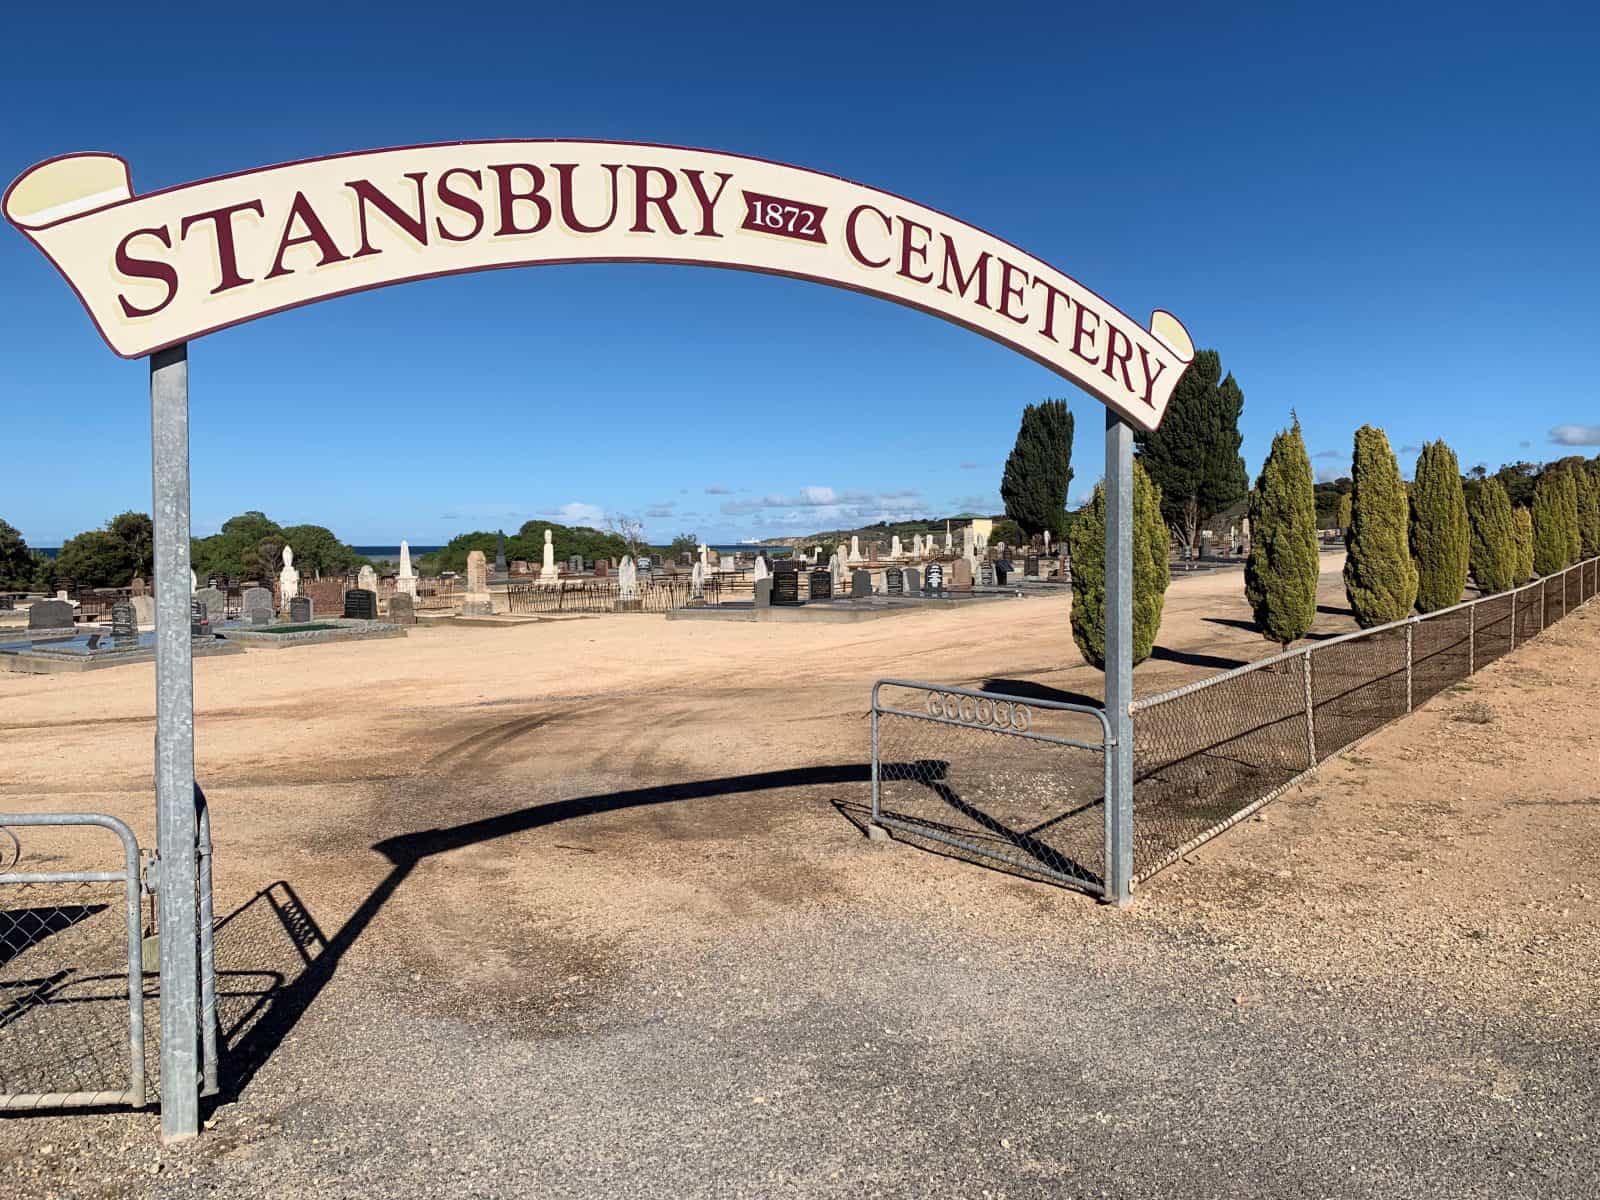 Stansbury Cemetery - Entrance